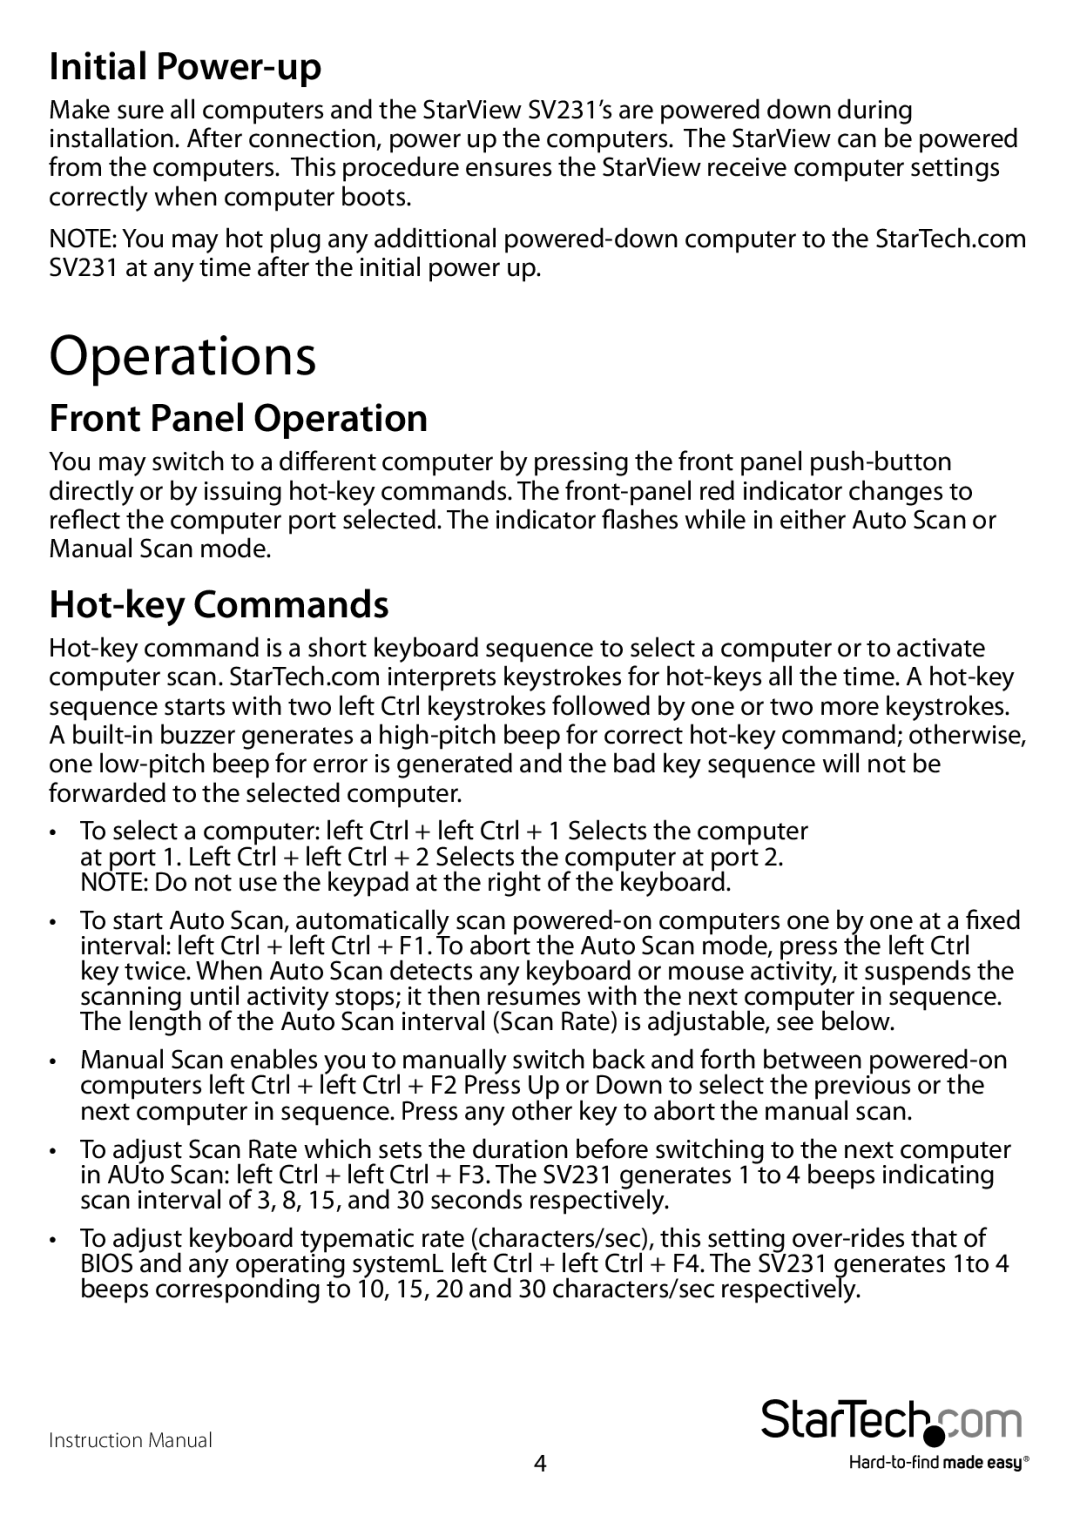 StarTech.com Sv231 manual Operations, Initial Power-up, Front Panel Operation, Hot-key Commands 